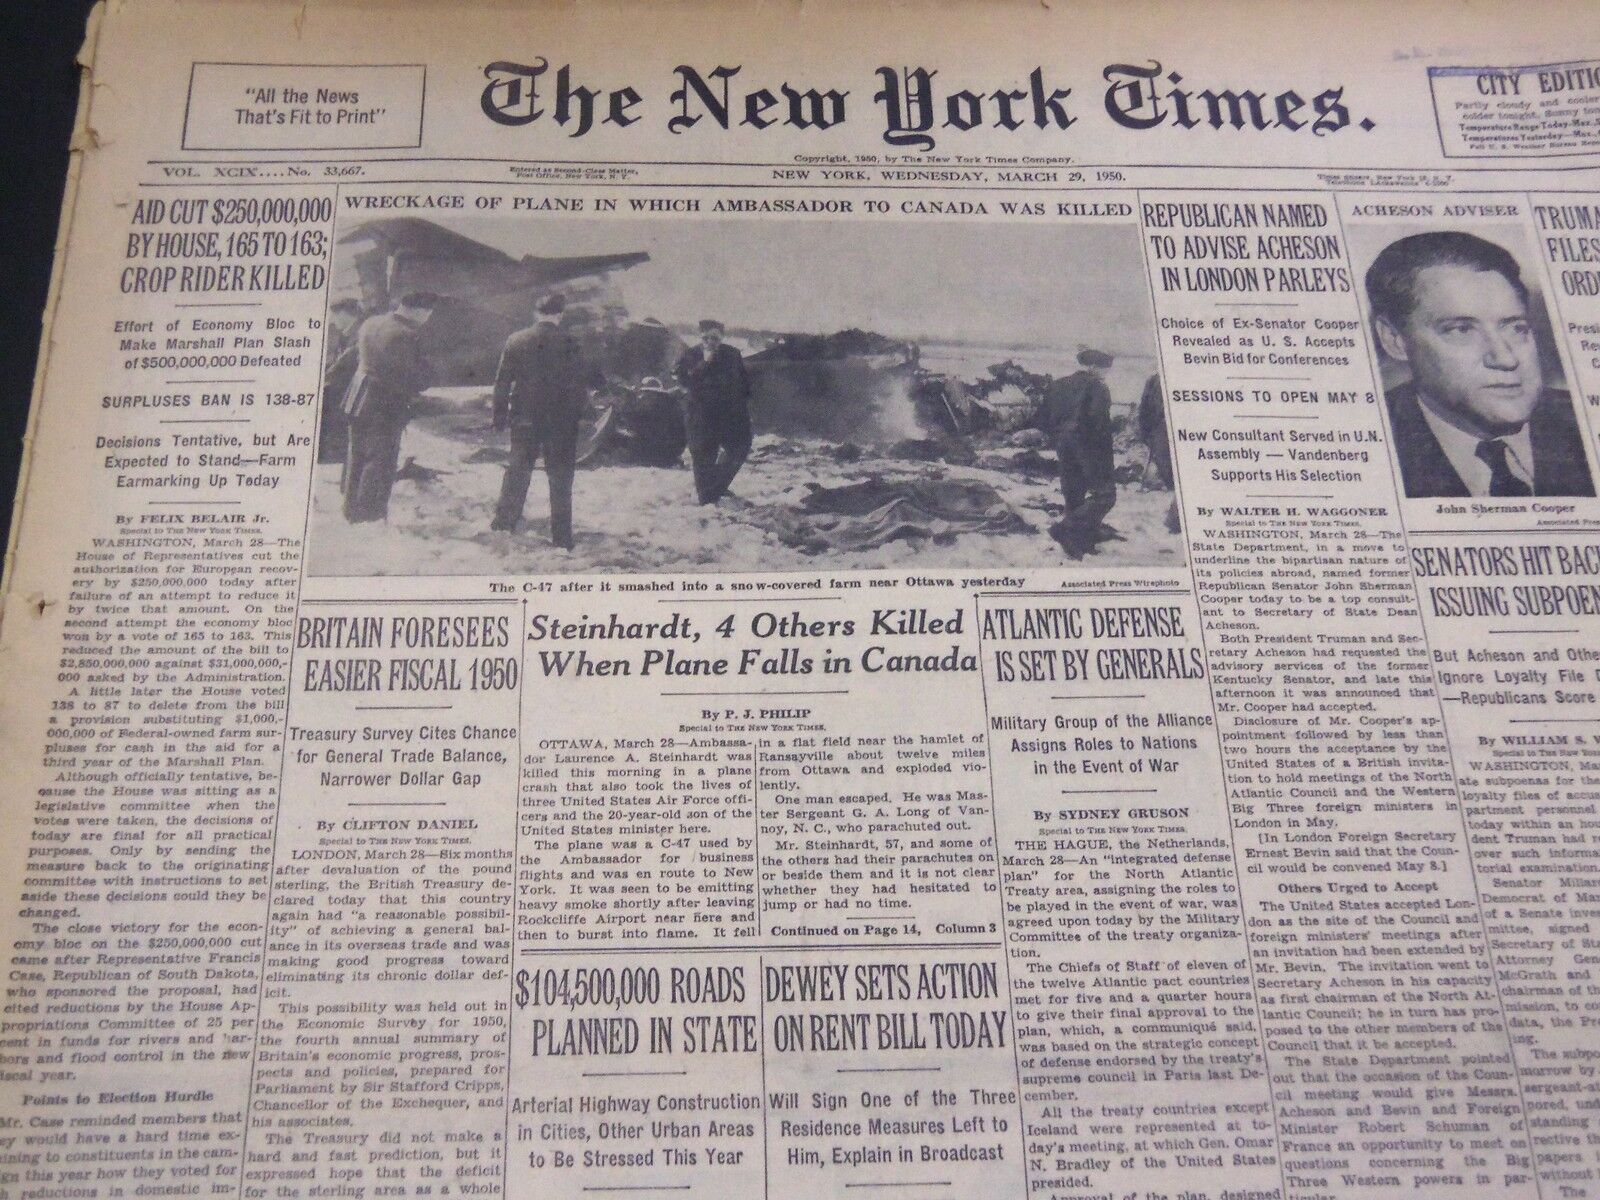 1950 MARCH 29 NEW YORK TIMES - STEINHARDT, 4 OTHERS KILLED IN CRASH - NT 4651